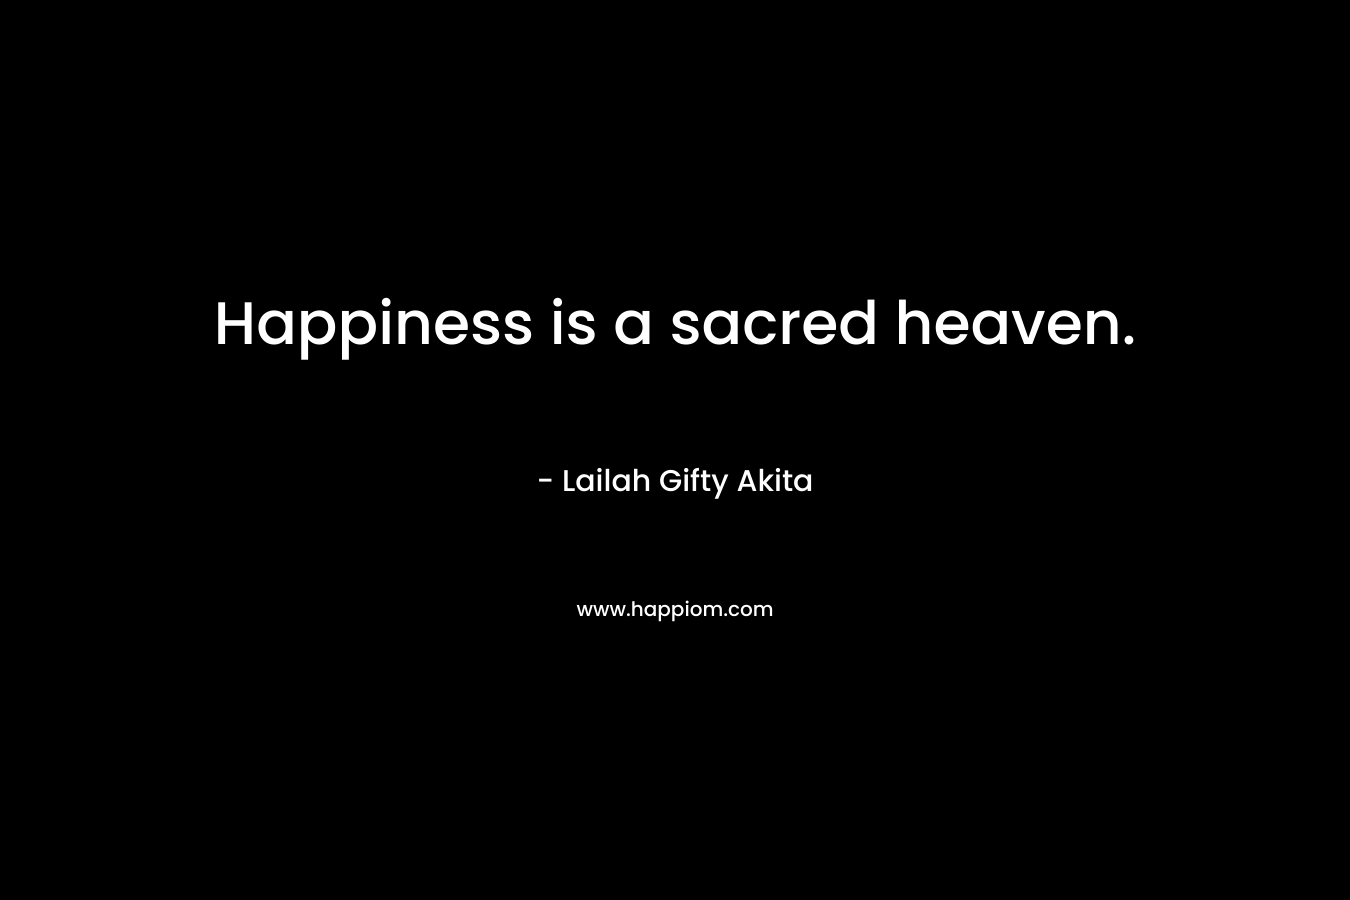 Happiness is a sacred heaven.